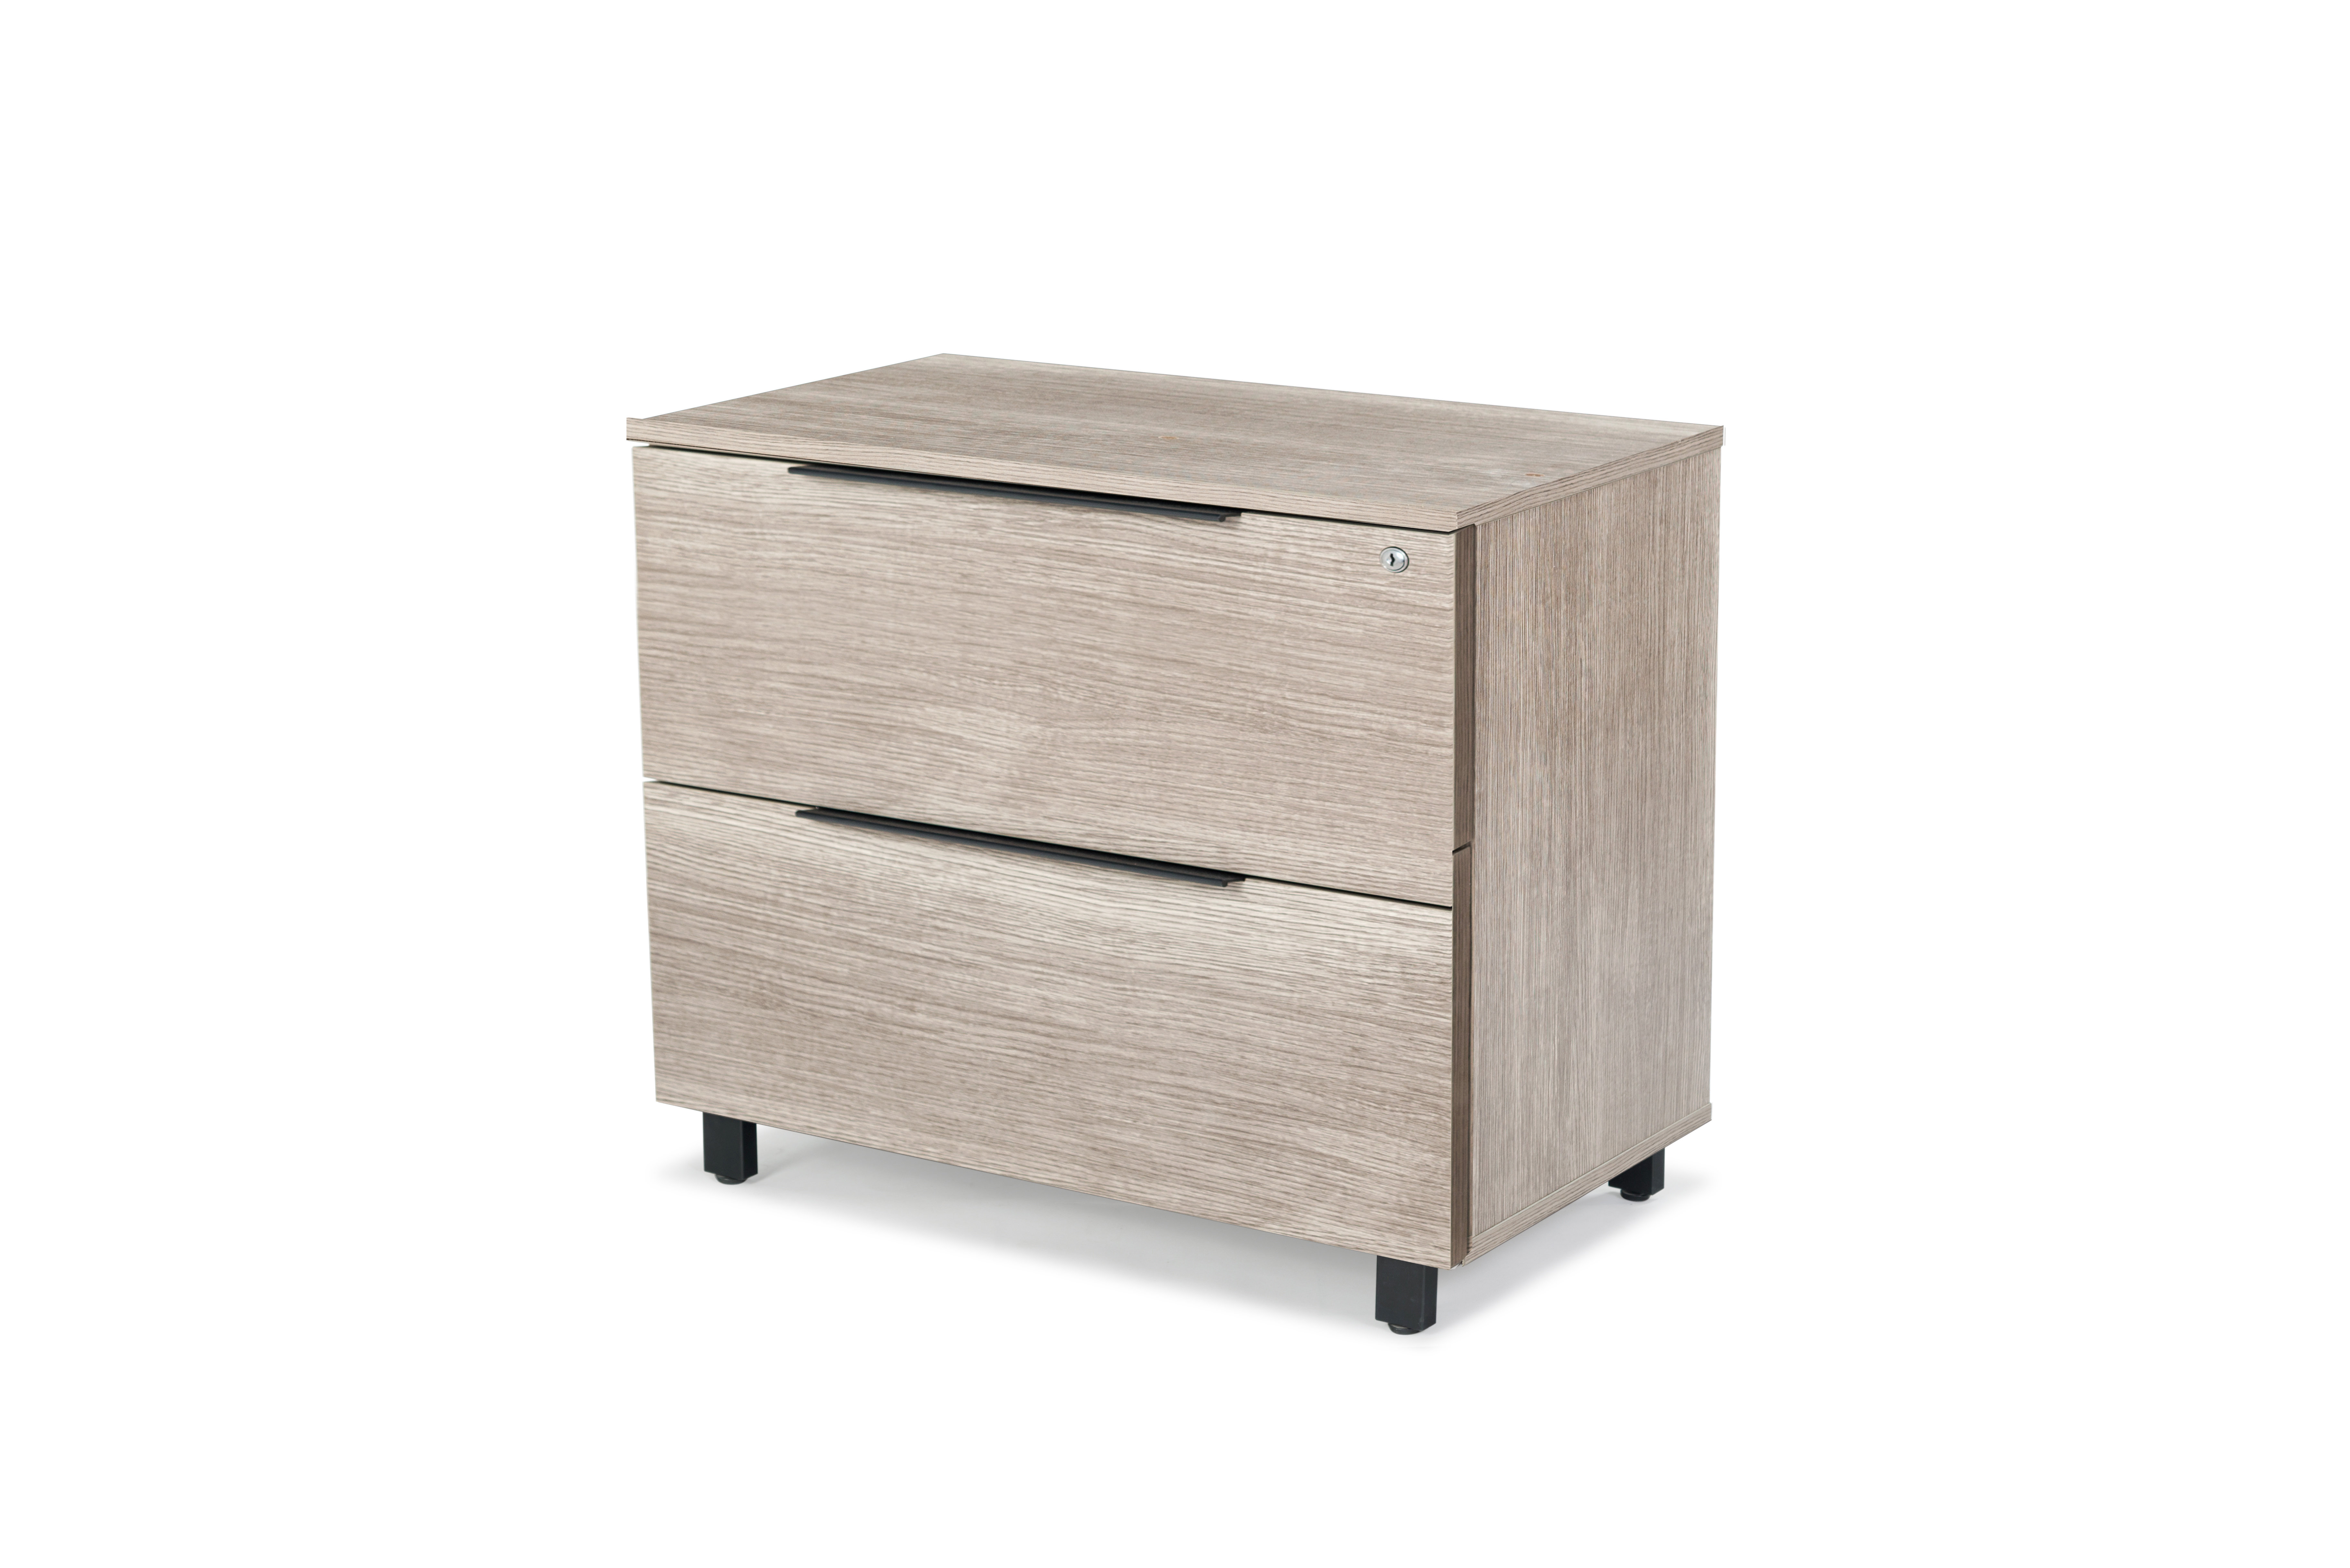 Ebern Designs Albin 2 Drawer Lateral Filing Cabinet Wayfair within dimensions 7283 X 4861